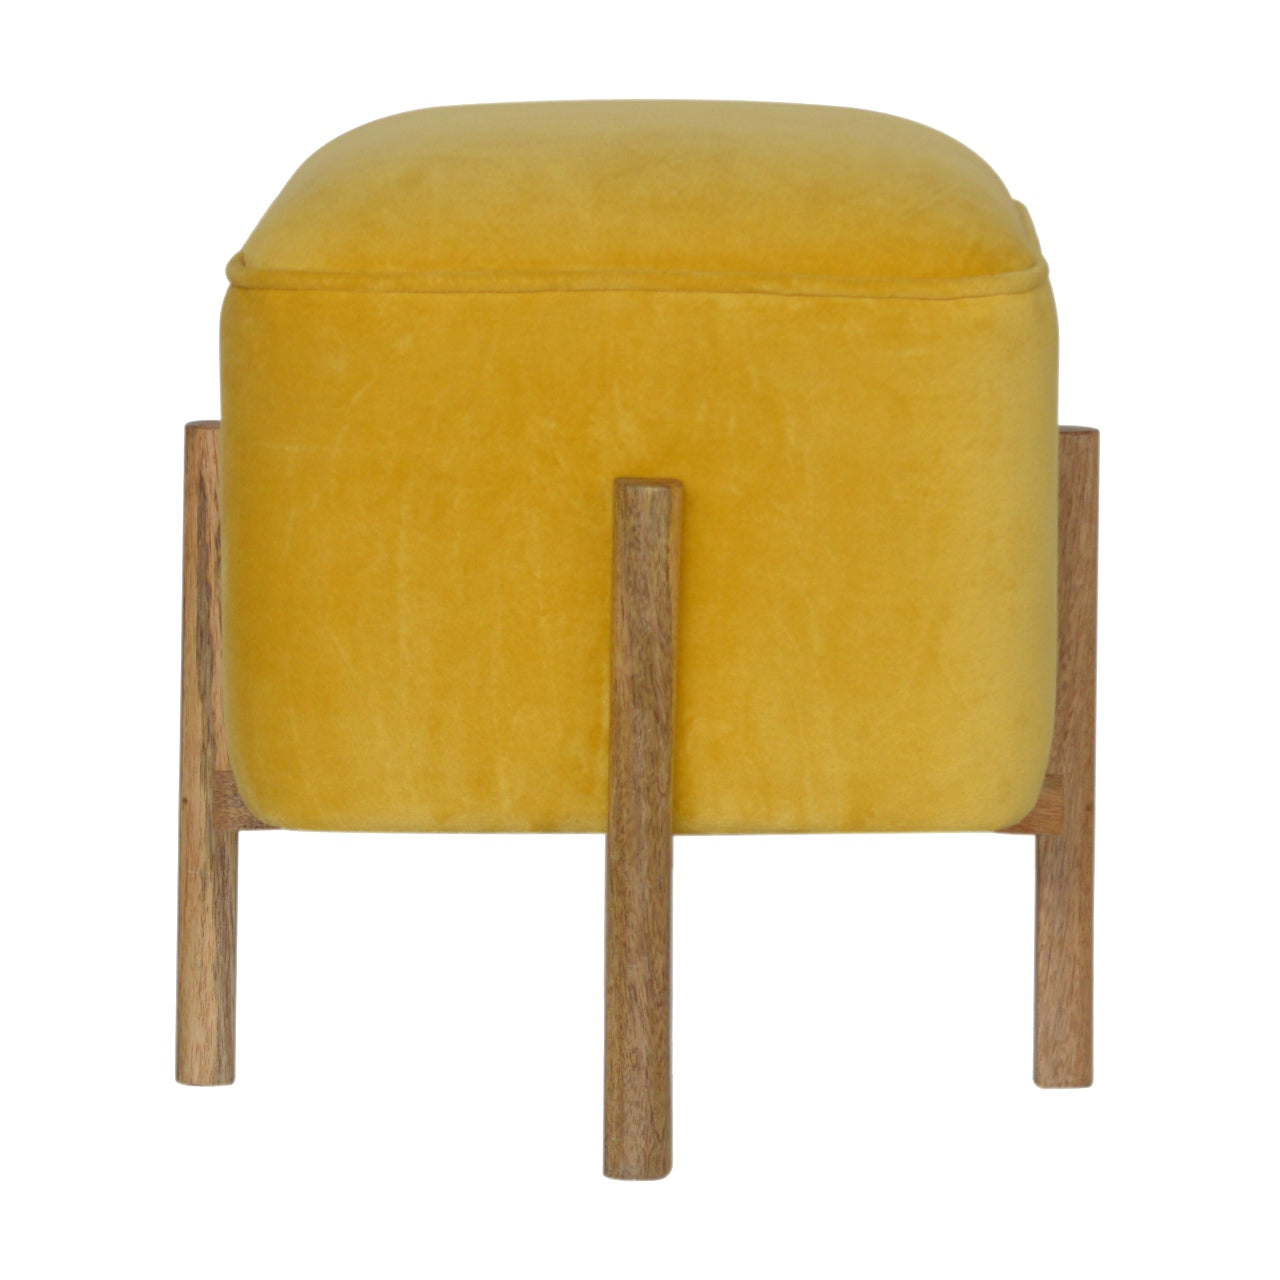 View Mustard Velvet Footstool with Solid Wood Legs information